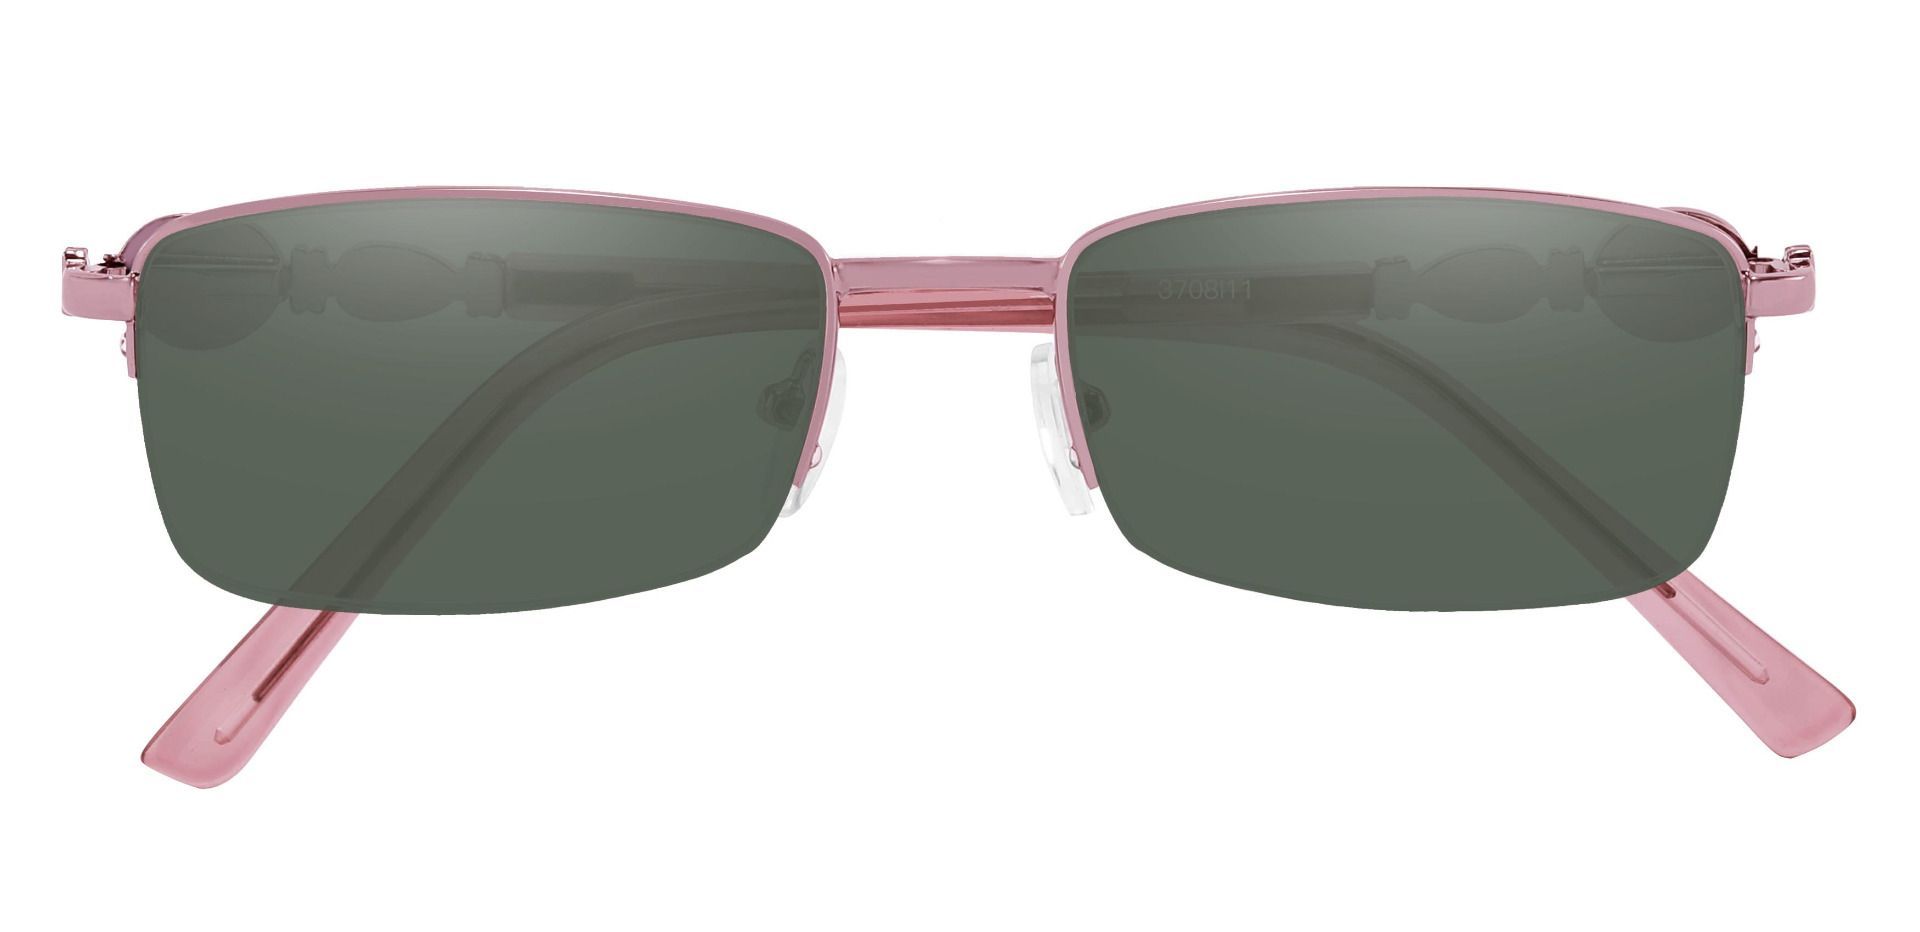 Crowley Rectangle Lined Bifocal Sunglasses - Pink Frame With Green Lenses